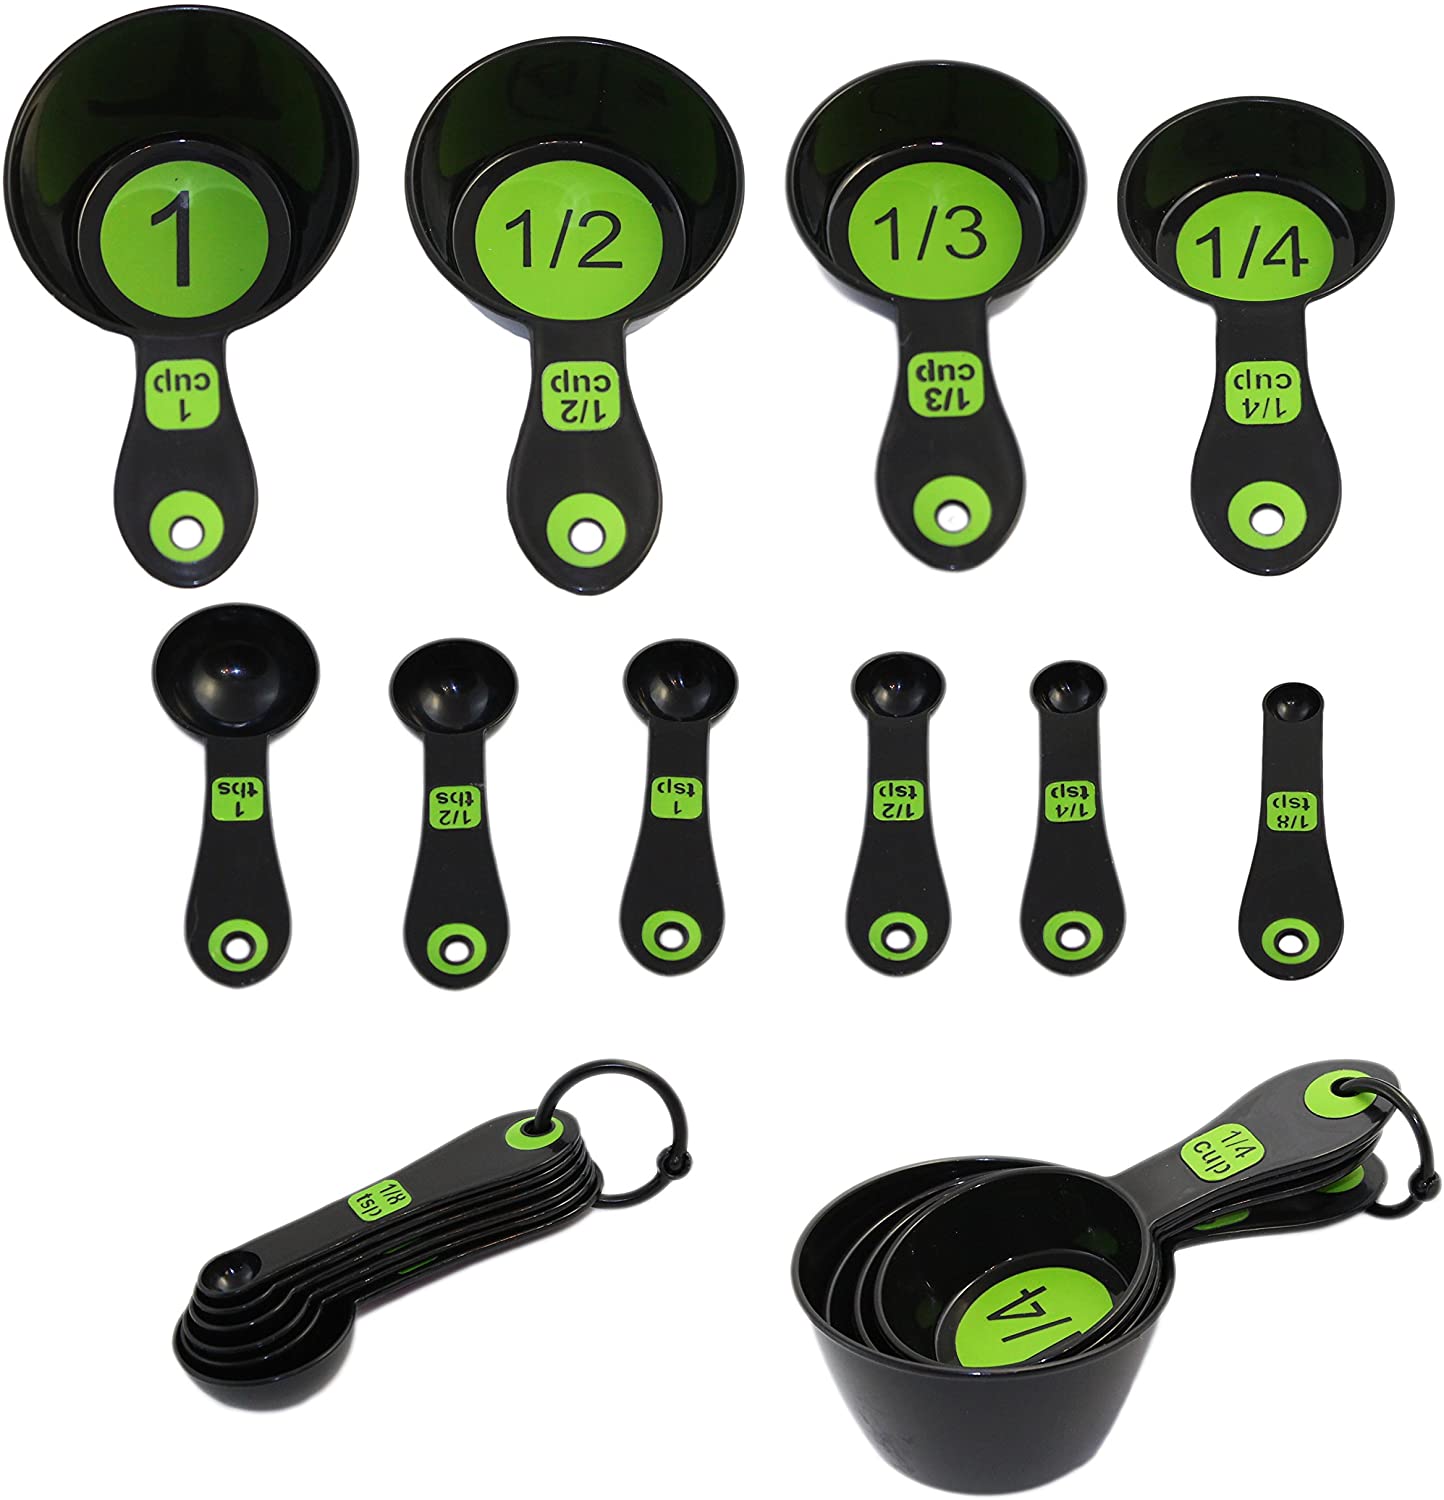 Chef Craft Set of 10 Piece Plastic Measuring Spoons and Measuring Cups (Black & Green) - image 2 of 2